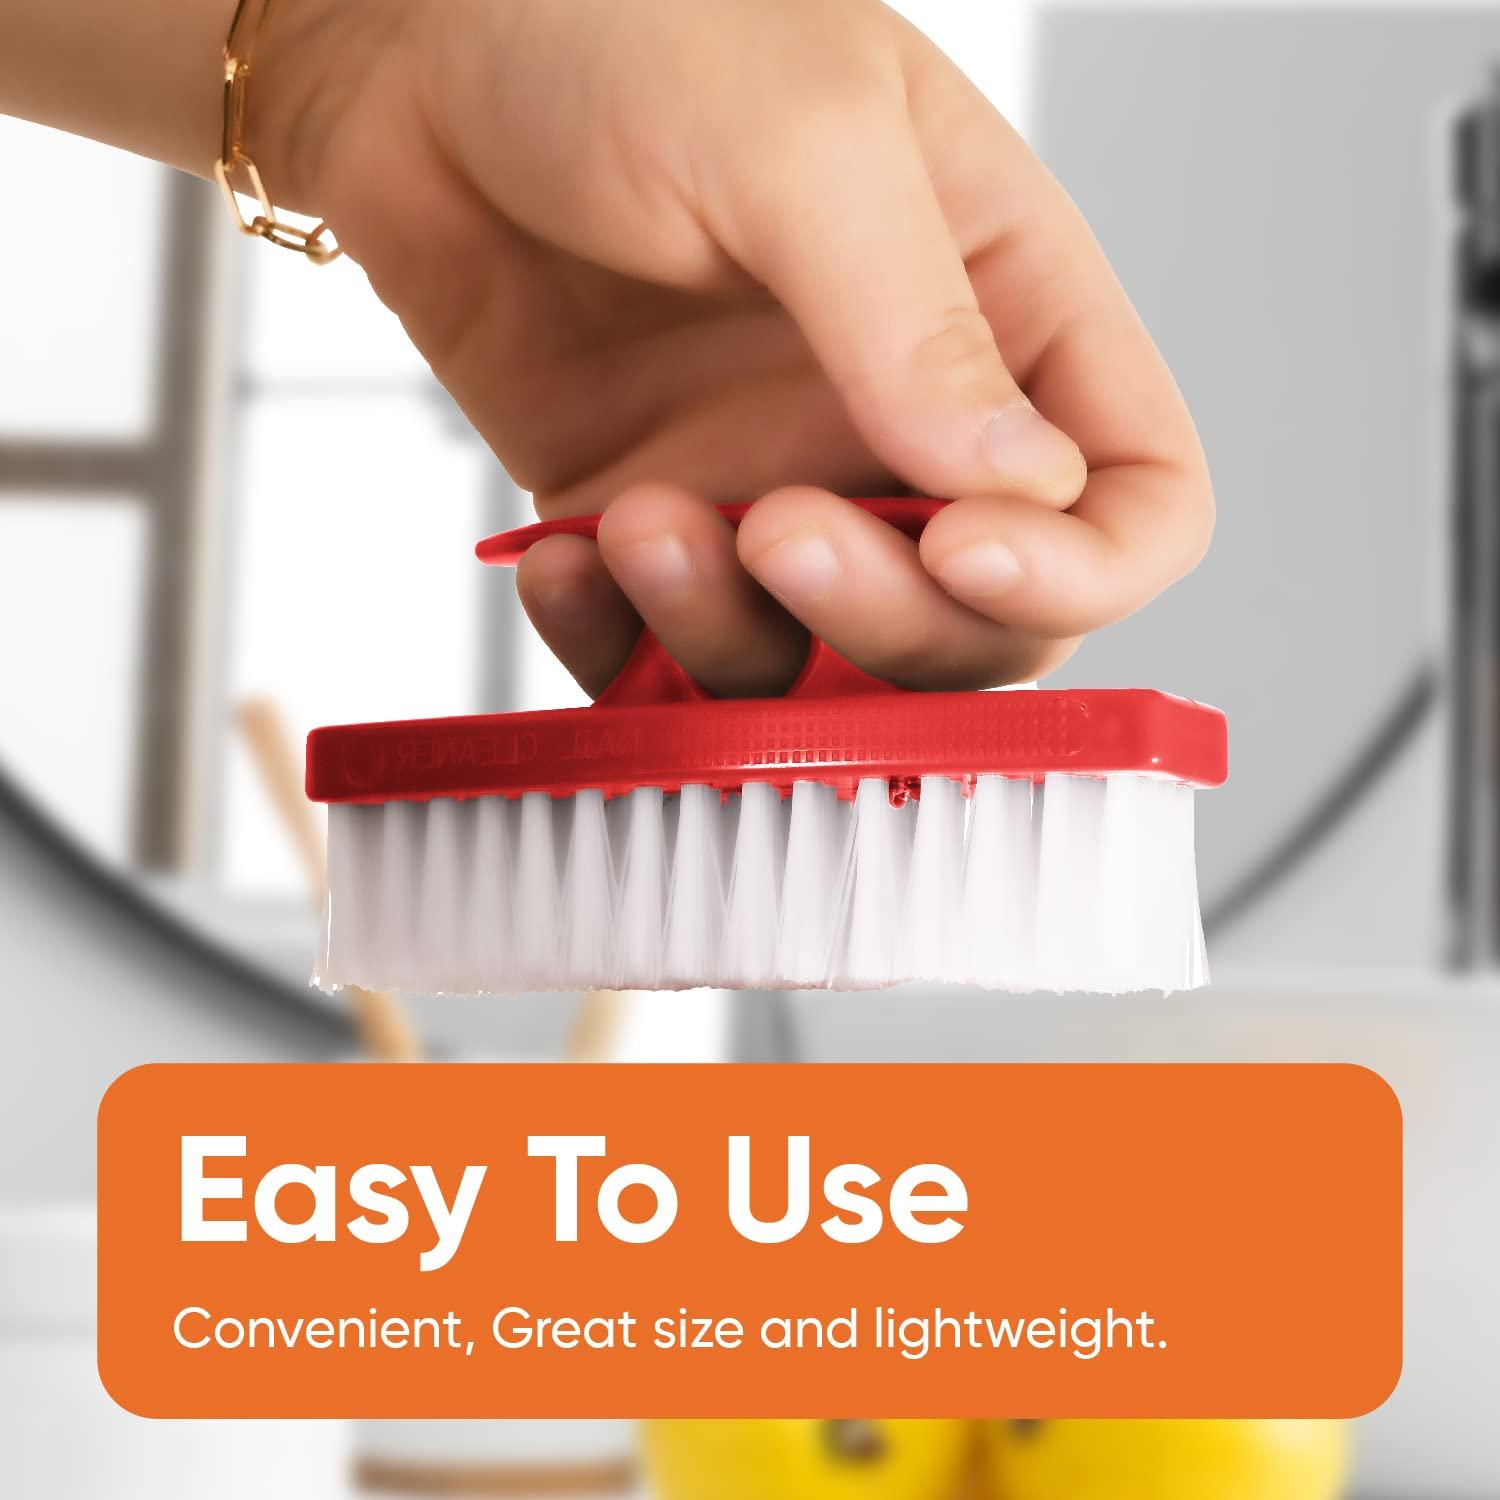 The Grate Scrubbie Cleaning Brush